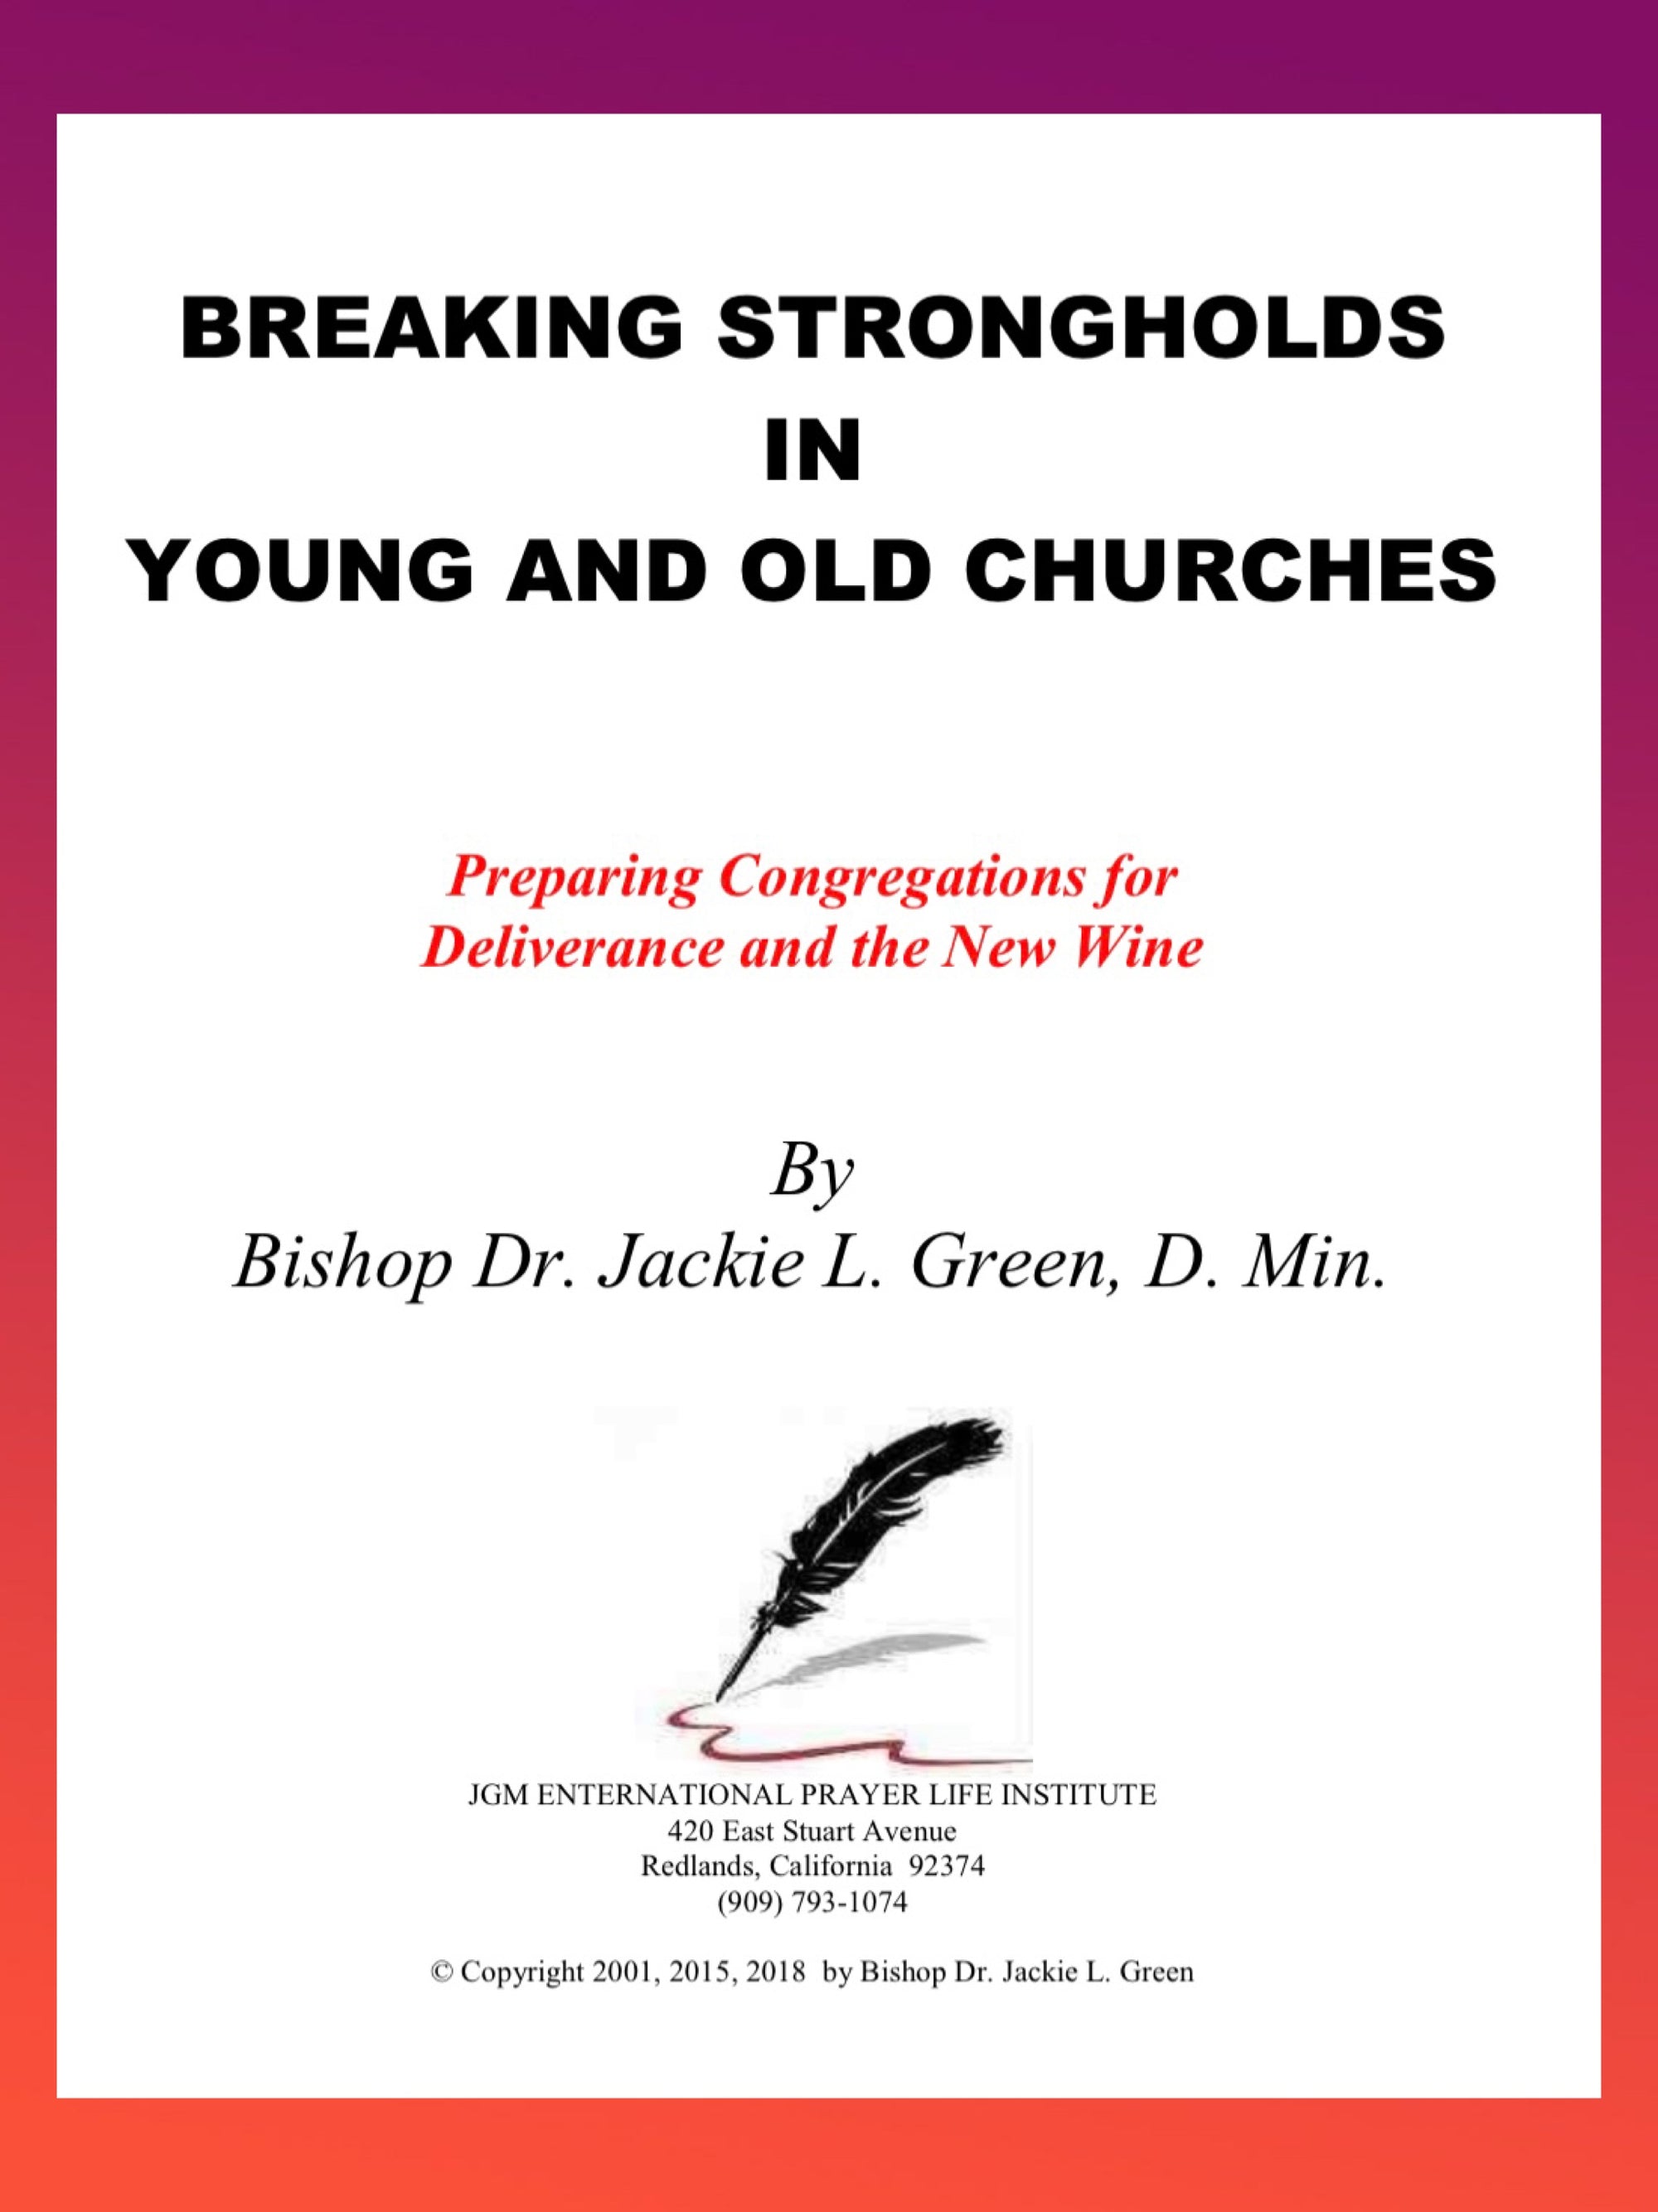 BREAKING STRONGHOLDS IN YOUNG AND OLD CHURCHES